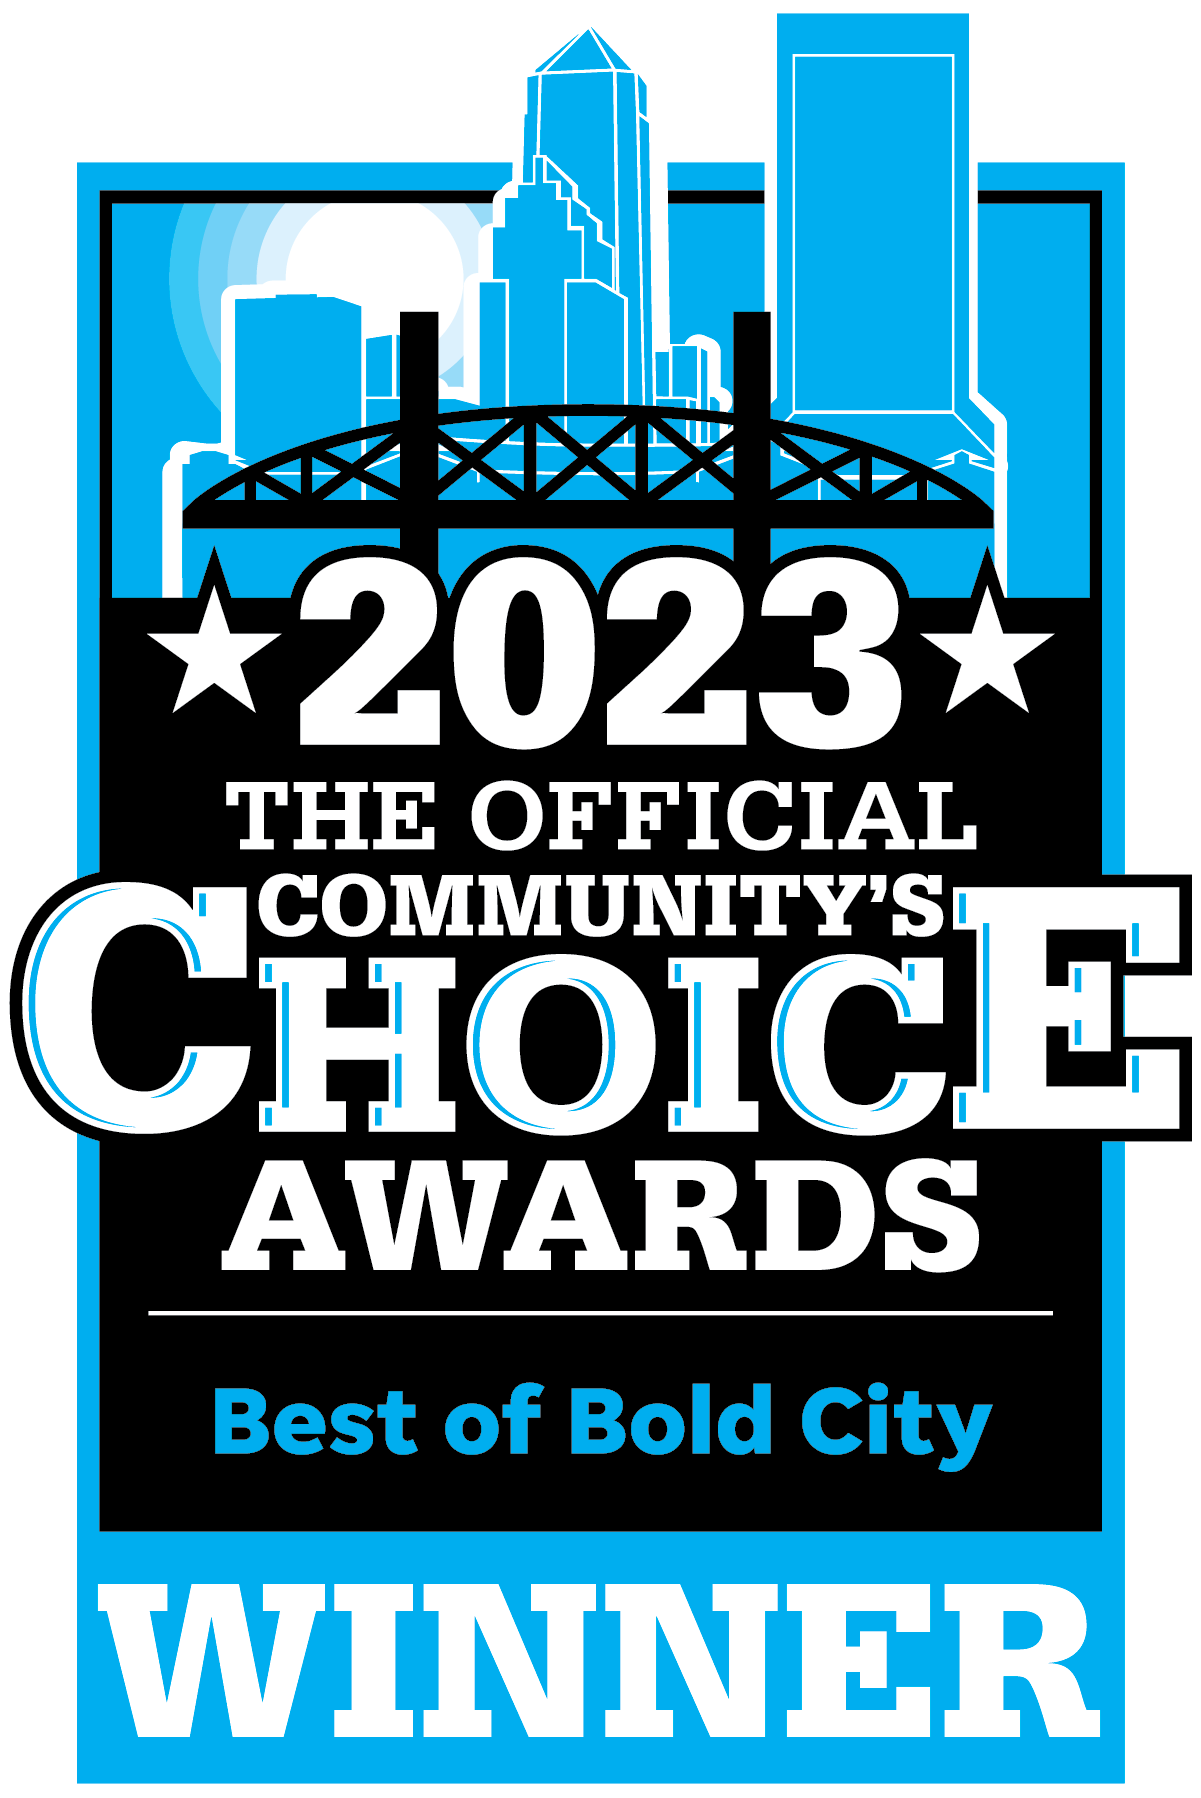 The official community's choice award for best bold city winner.